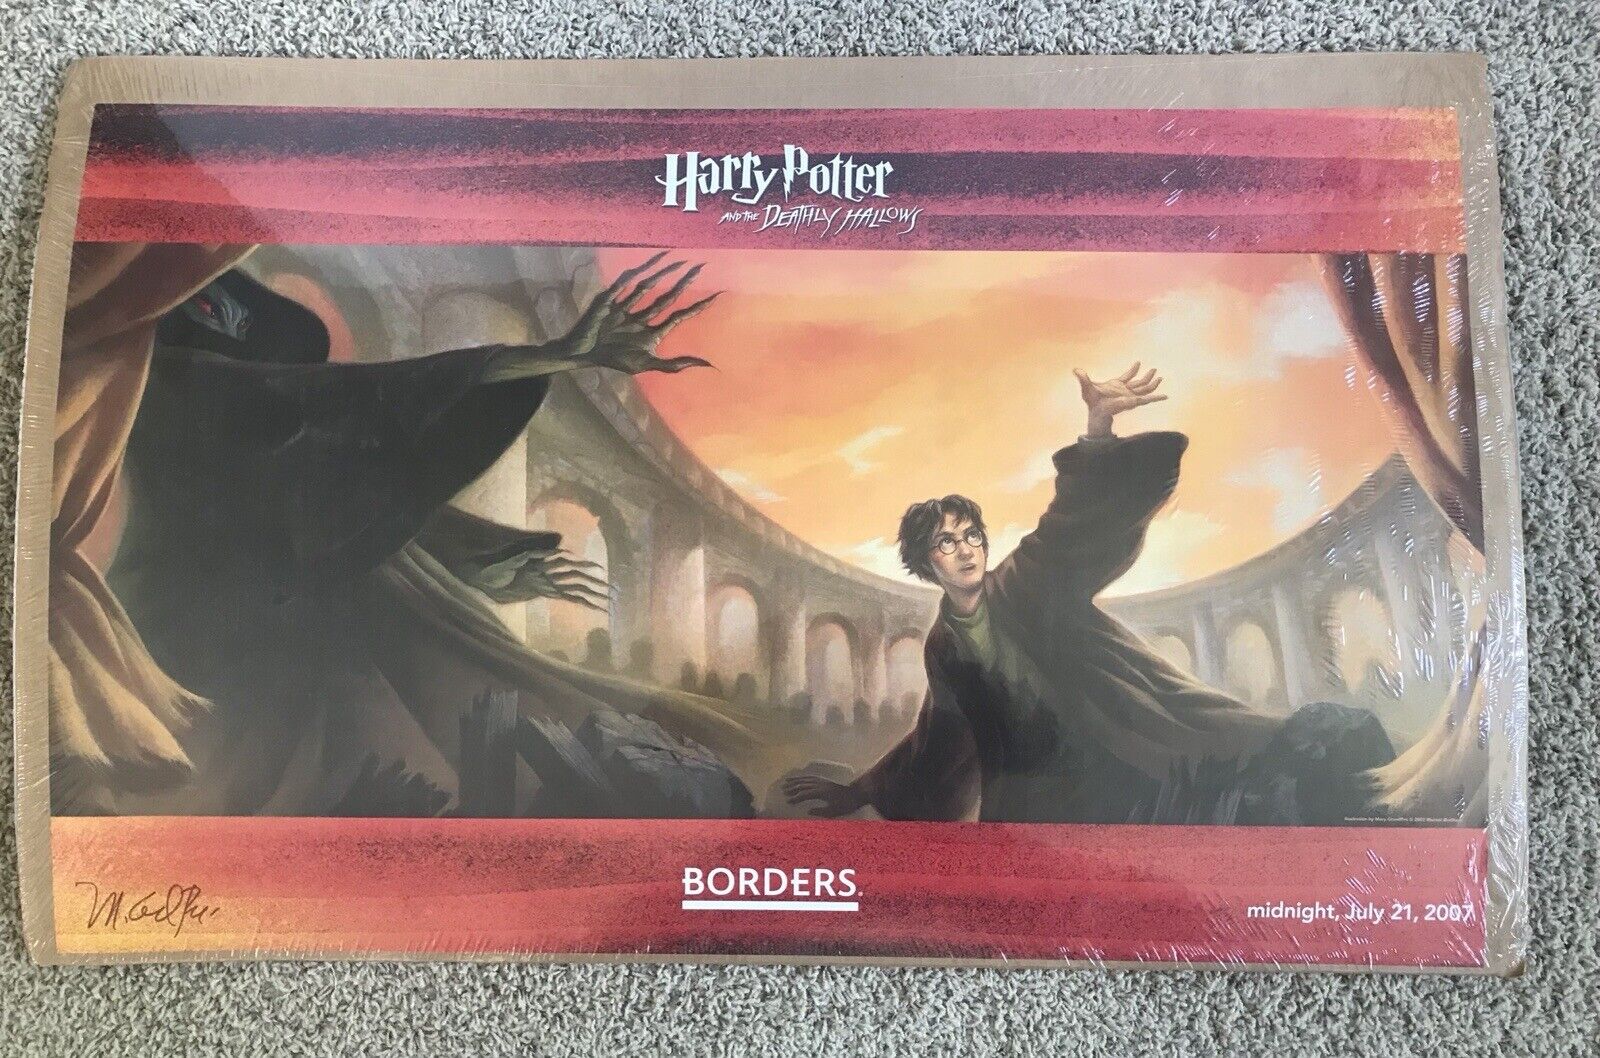 Harry Potter Deathly Hallows Borders Book Release Poster SIGNED Mary Grandpre